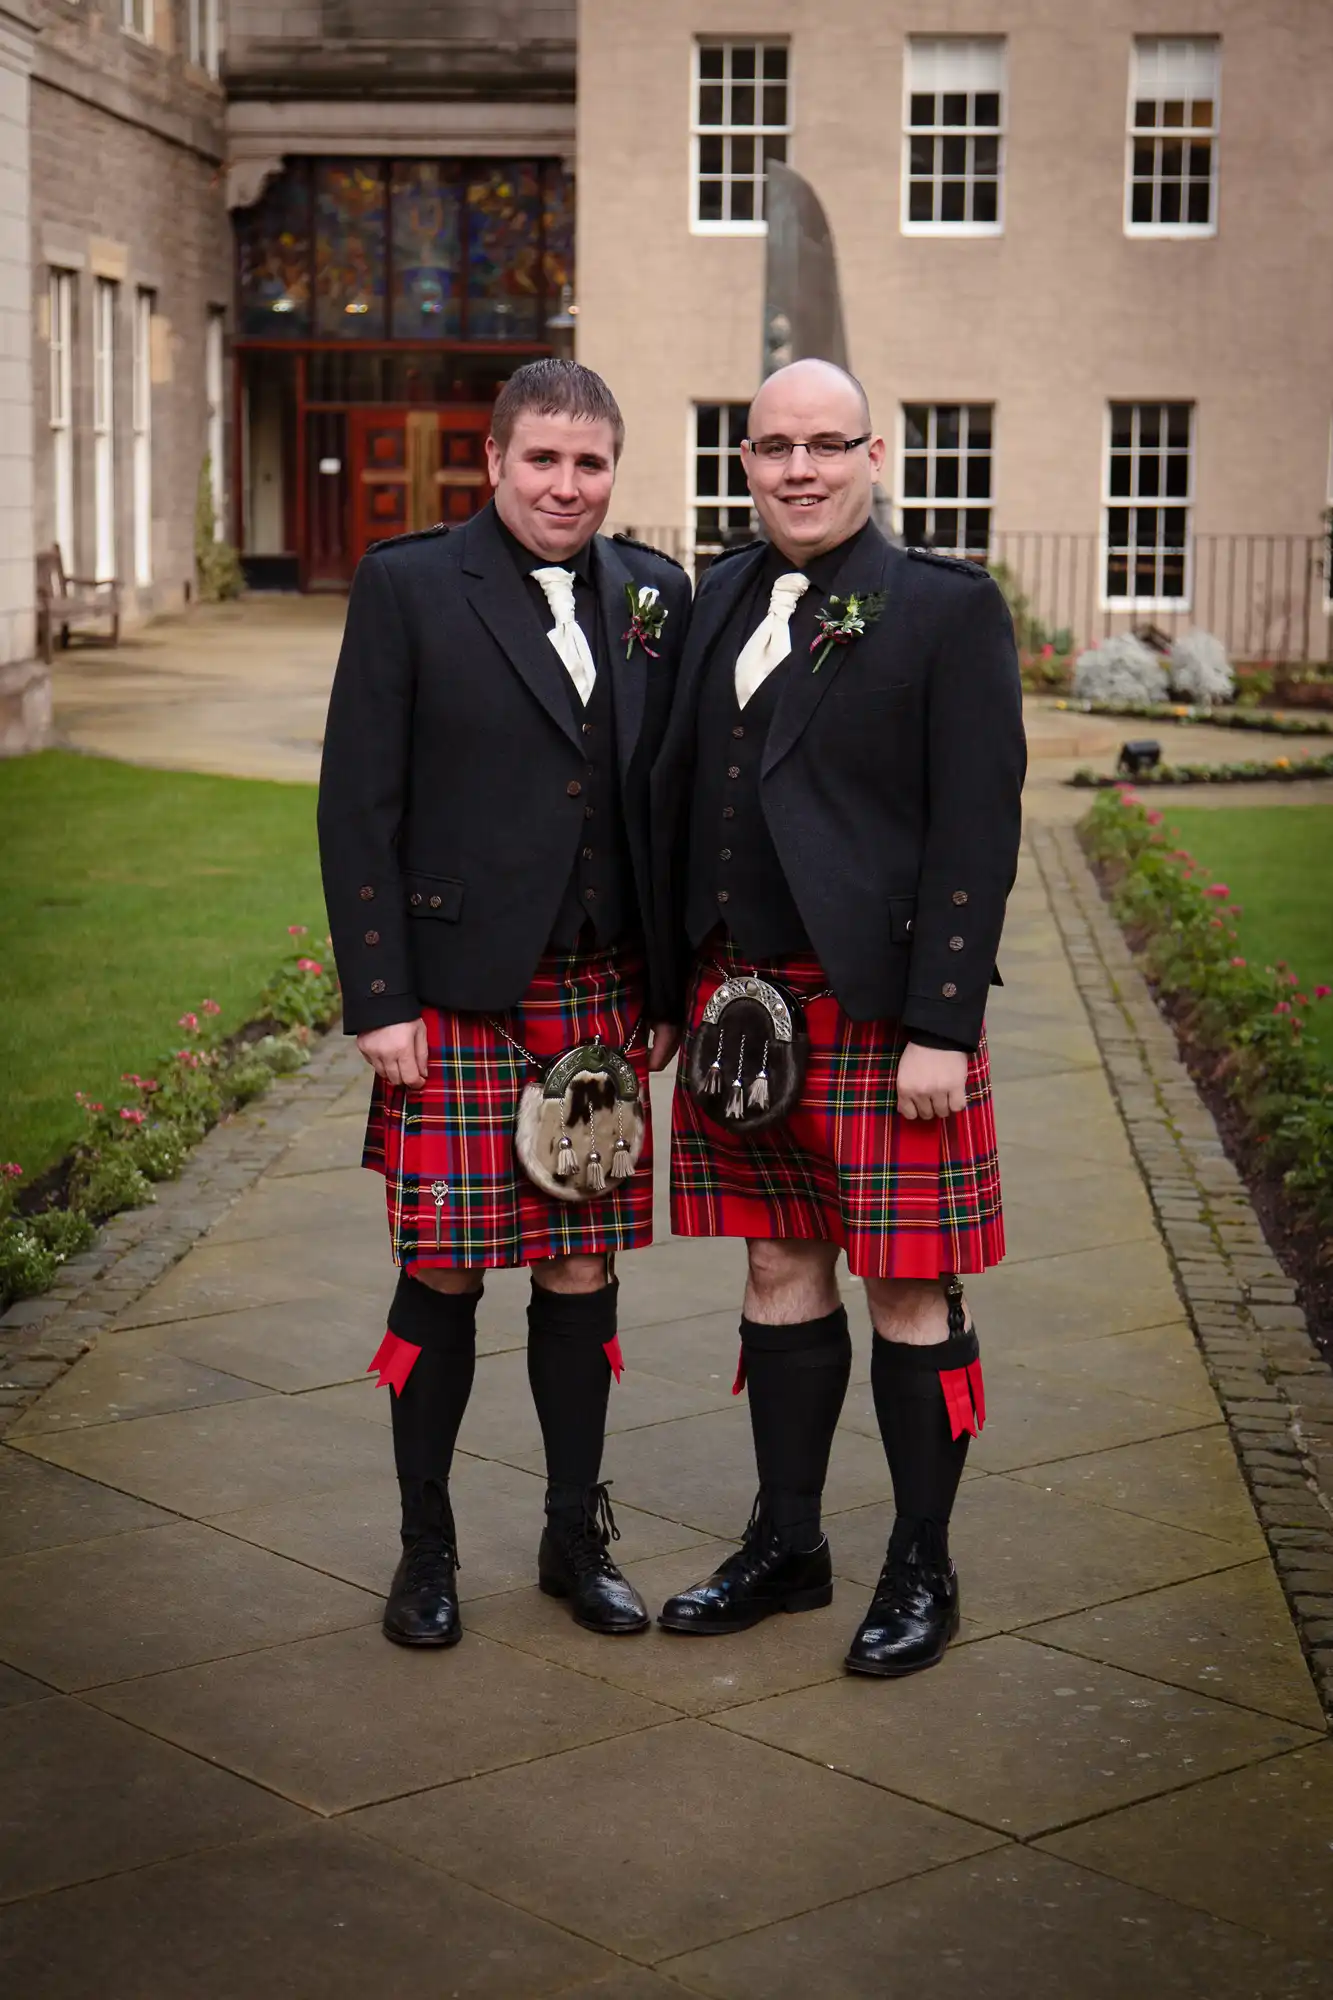 Two men in traditional scottish attire, including kilts and jackets, standing on a paved walkway outside a building with a stained-glass window.